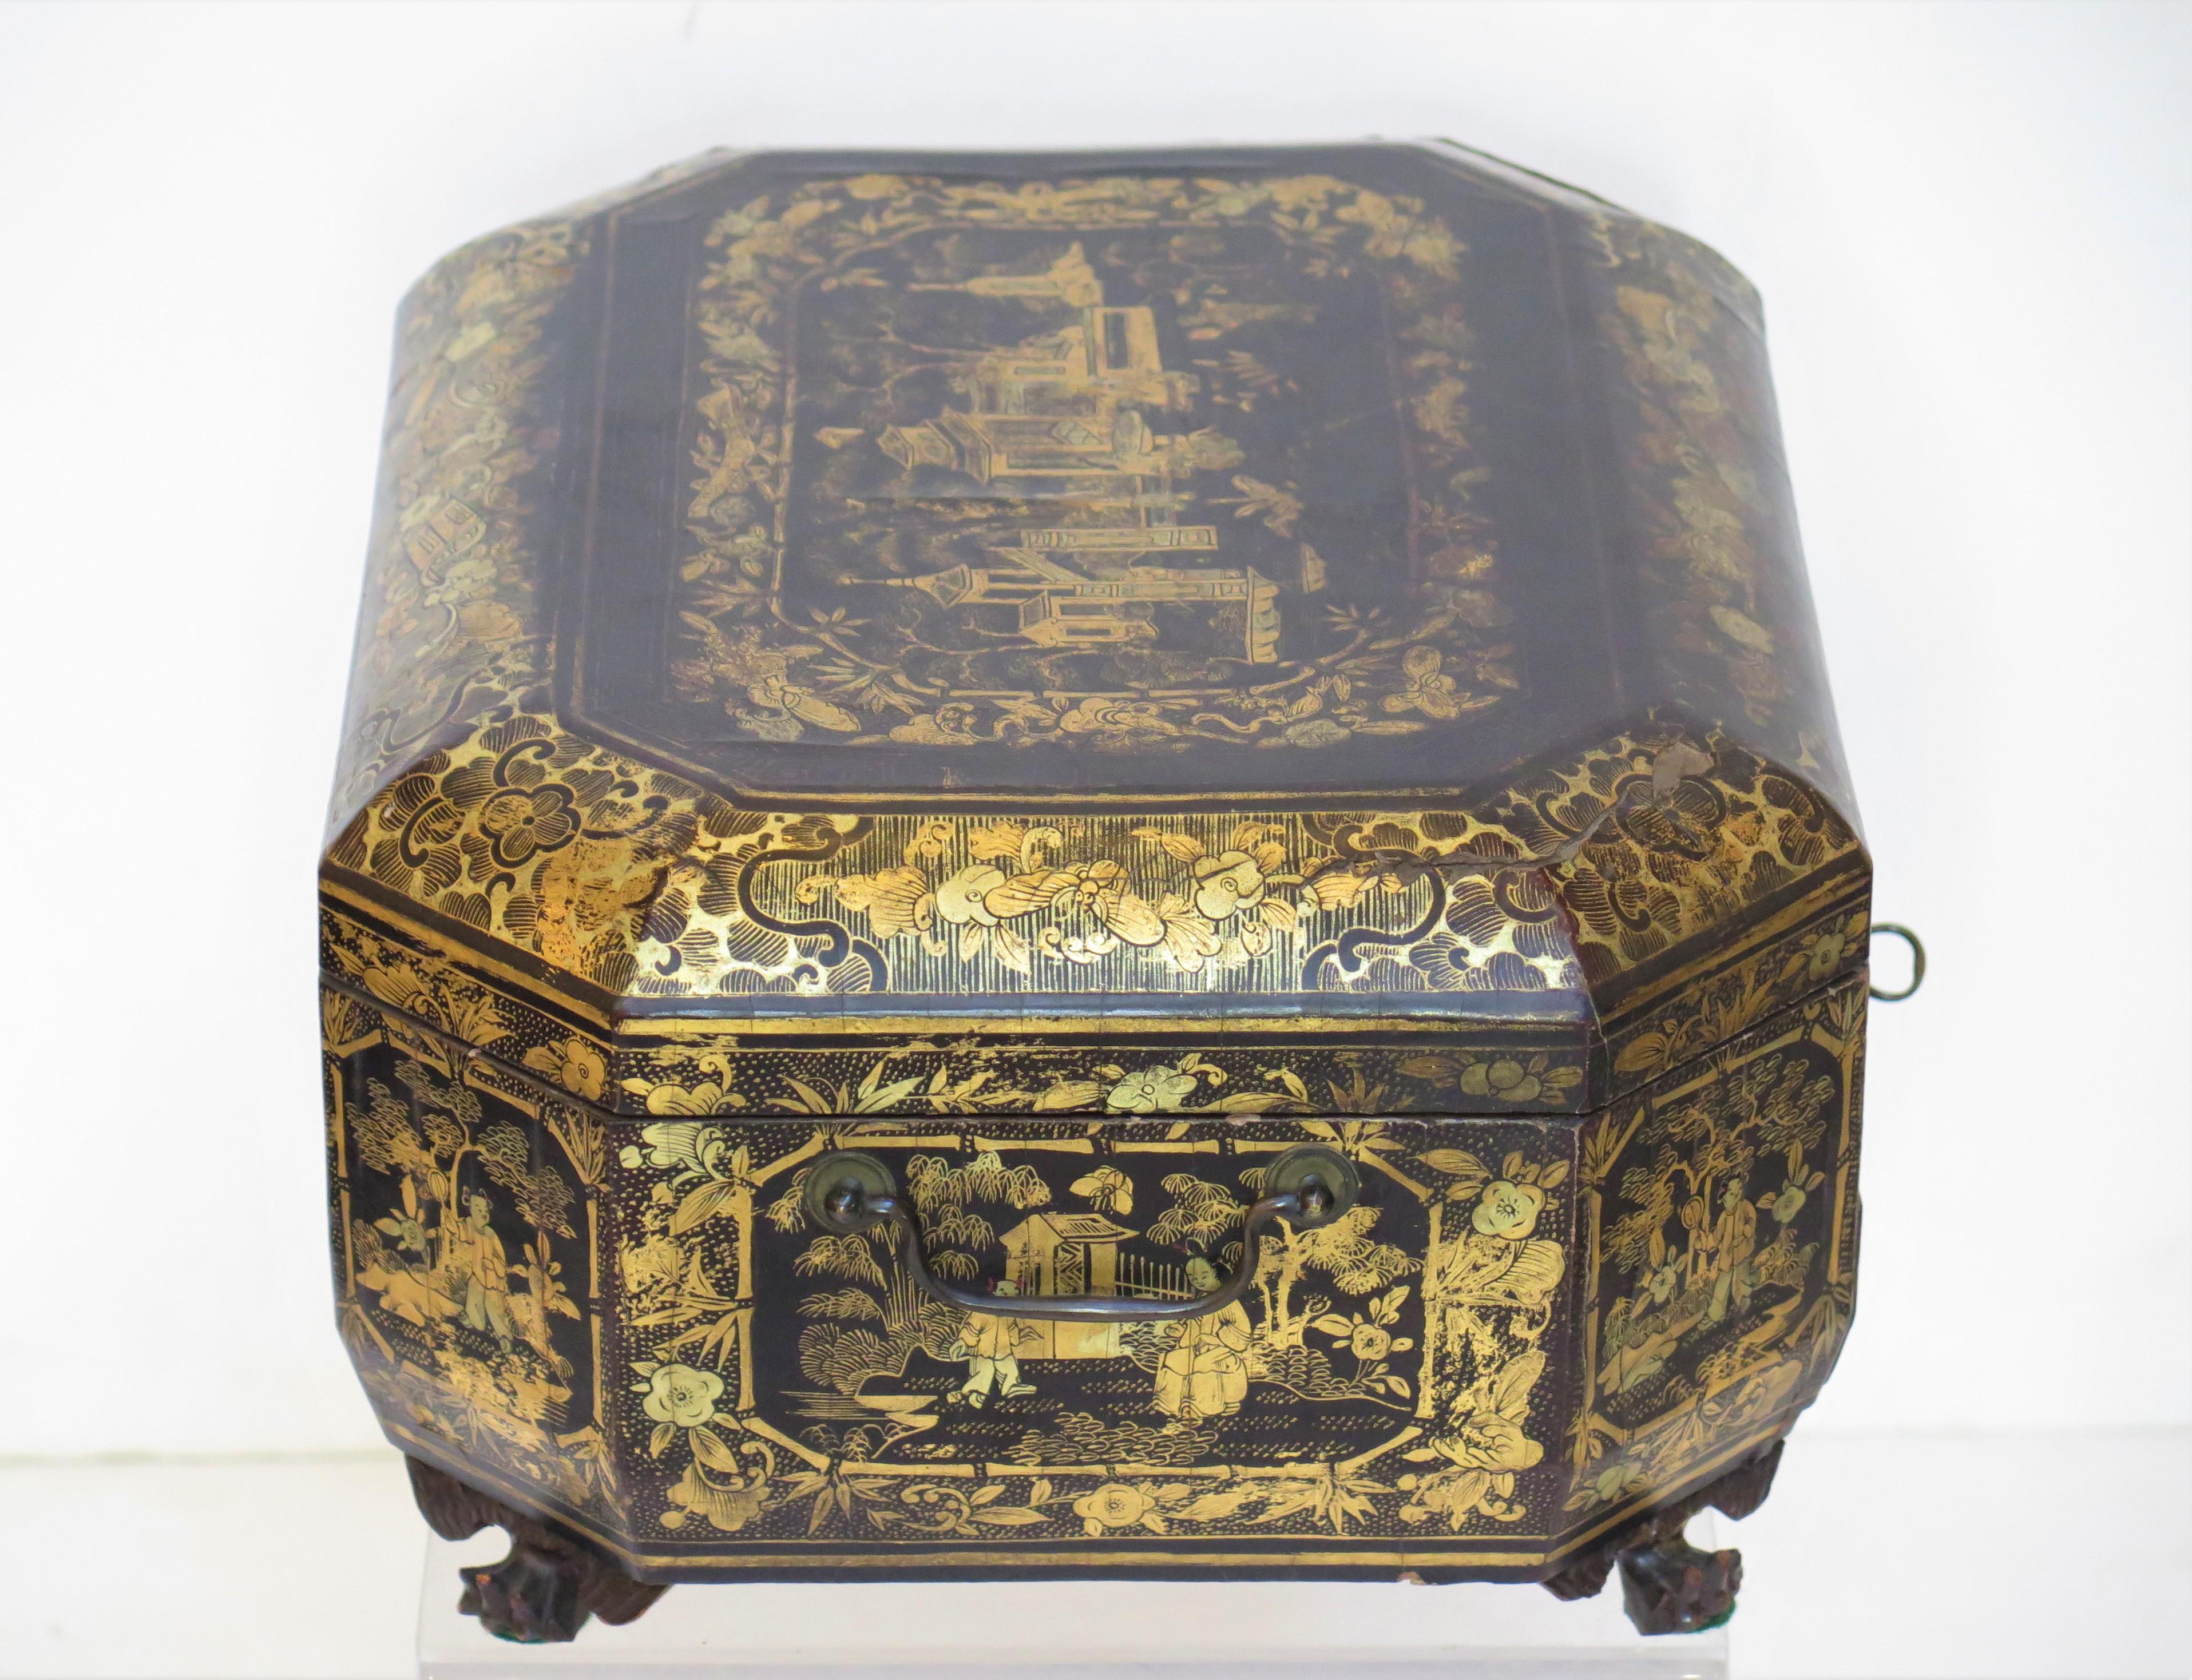 Chinoiserie Ealy 19th Century Chinese Export Lacquer Sewing Box For Sale